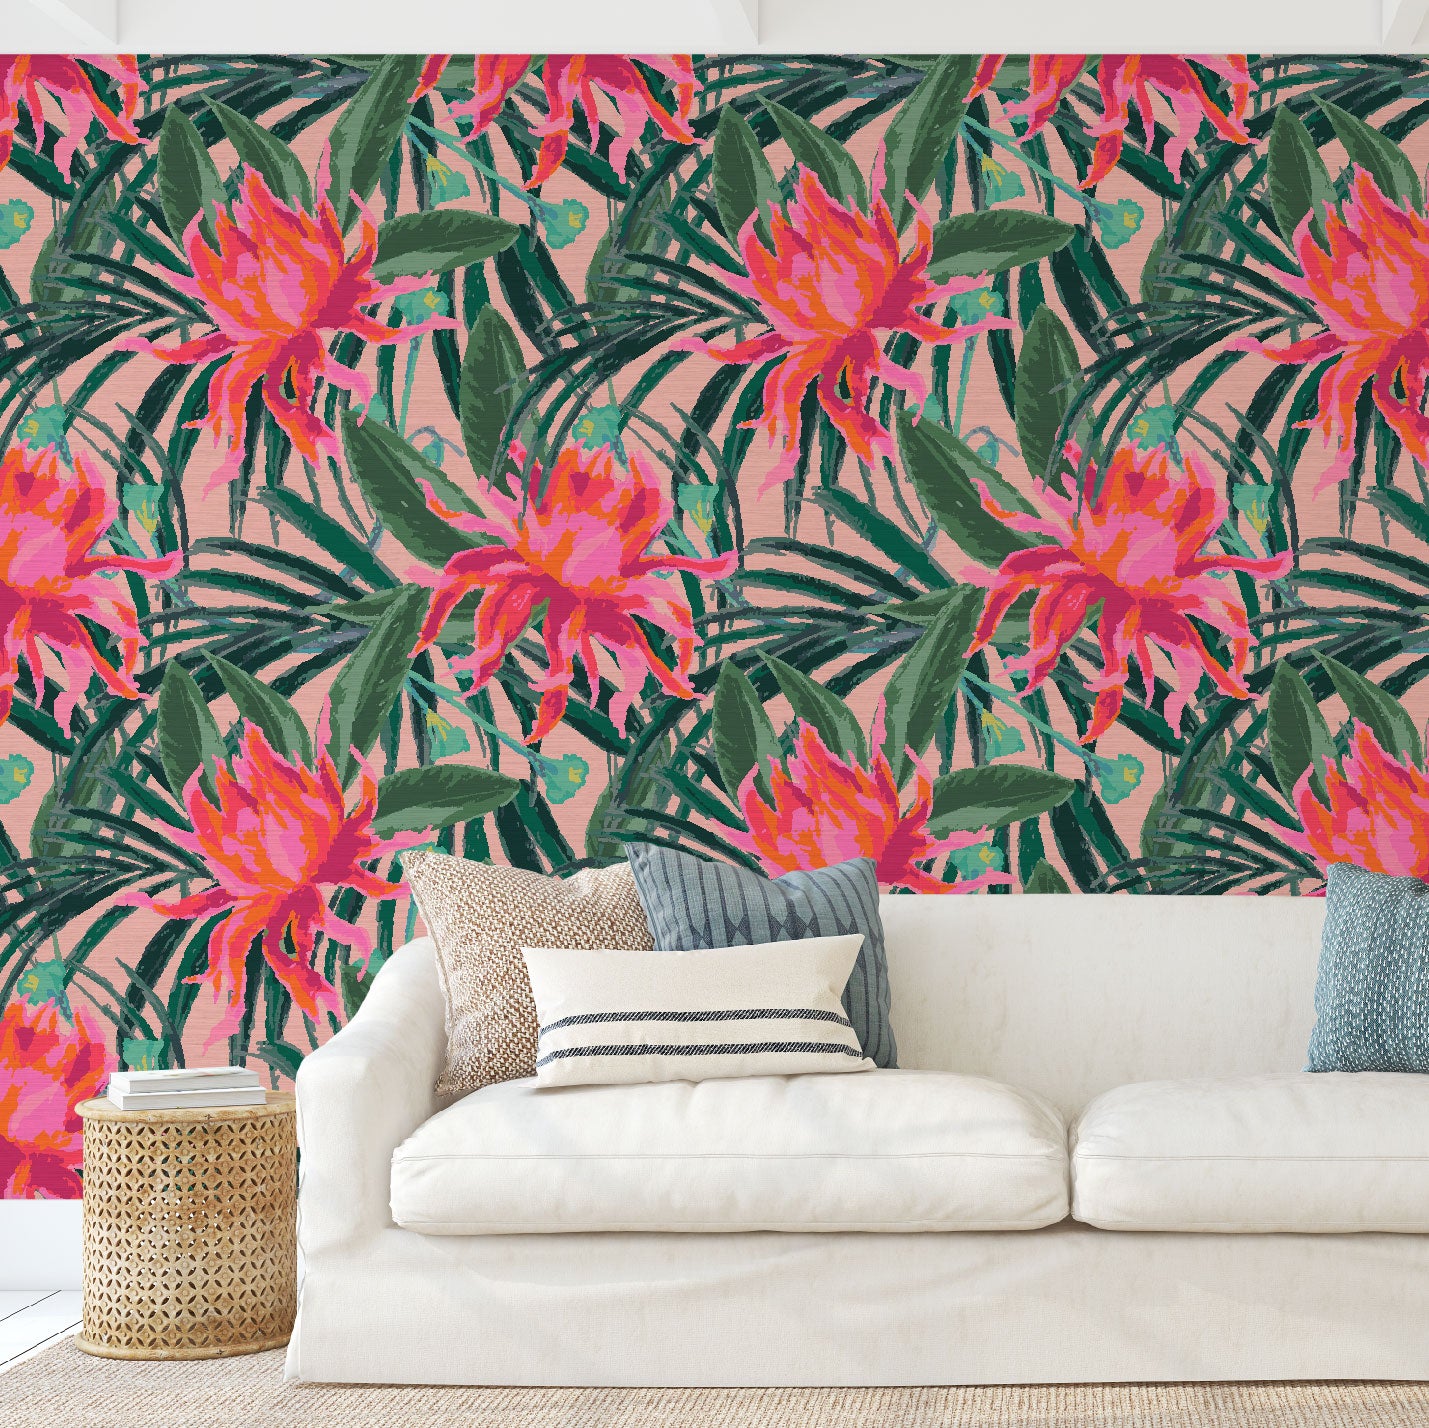 grasscloth wallpaper with light pink based featuring oversized painterly tropical flowers and palm leafs in striking shades of pink and leafs in shades of deep green Natural Textured Eco-Friendly Non-toxic High-quality Sustainable Interior Design Bold Custom Tailor-made Retro chic Tropical Jungle Coastal preppy Garden Seaside Coastal Seashore Waterfront Vacation home styling Retreat Relaxed beach vibes Beach cottage Shoreline Oceanfront botanical palm leaf living room